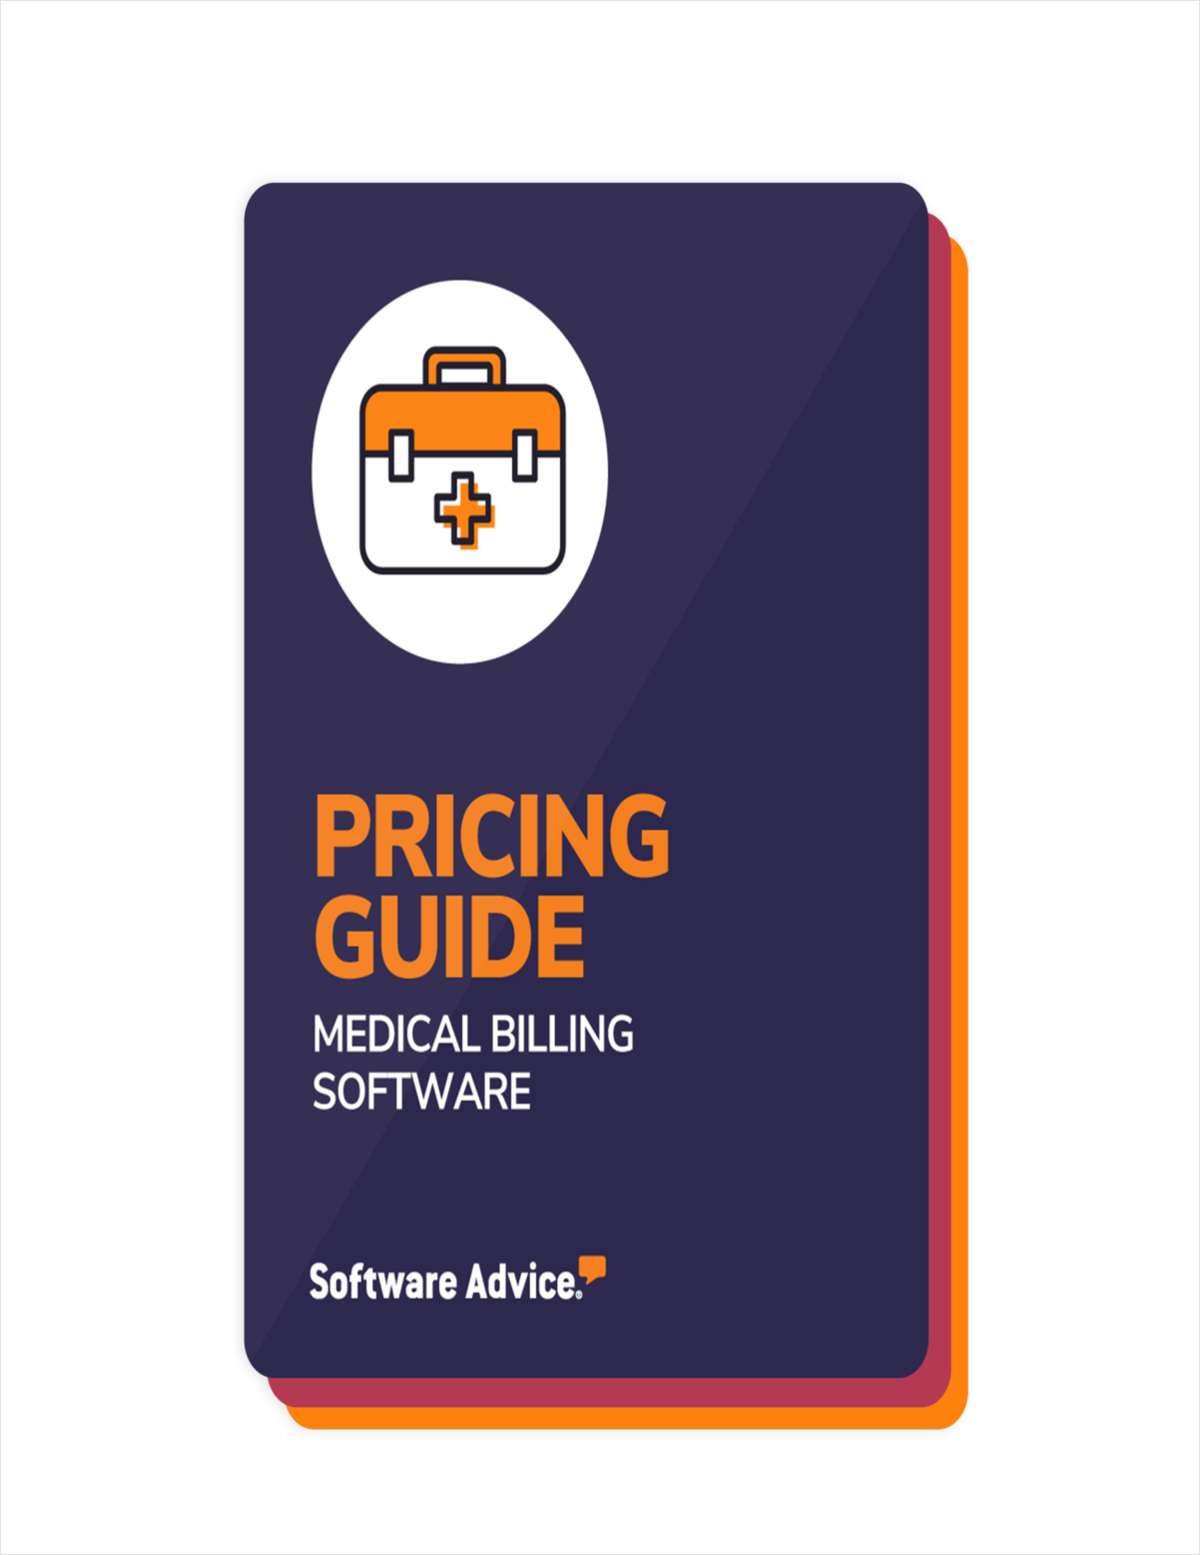 Don't Overpay: What to Know About Medical Billing Software Prices in 2022